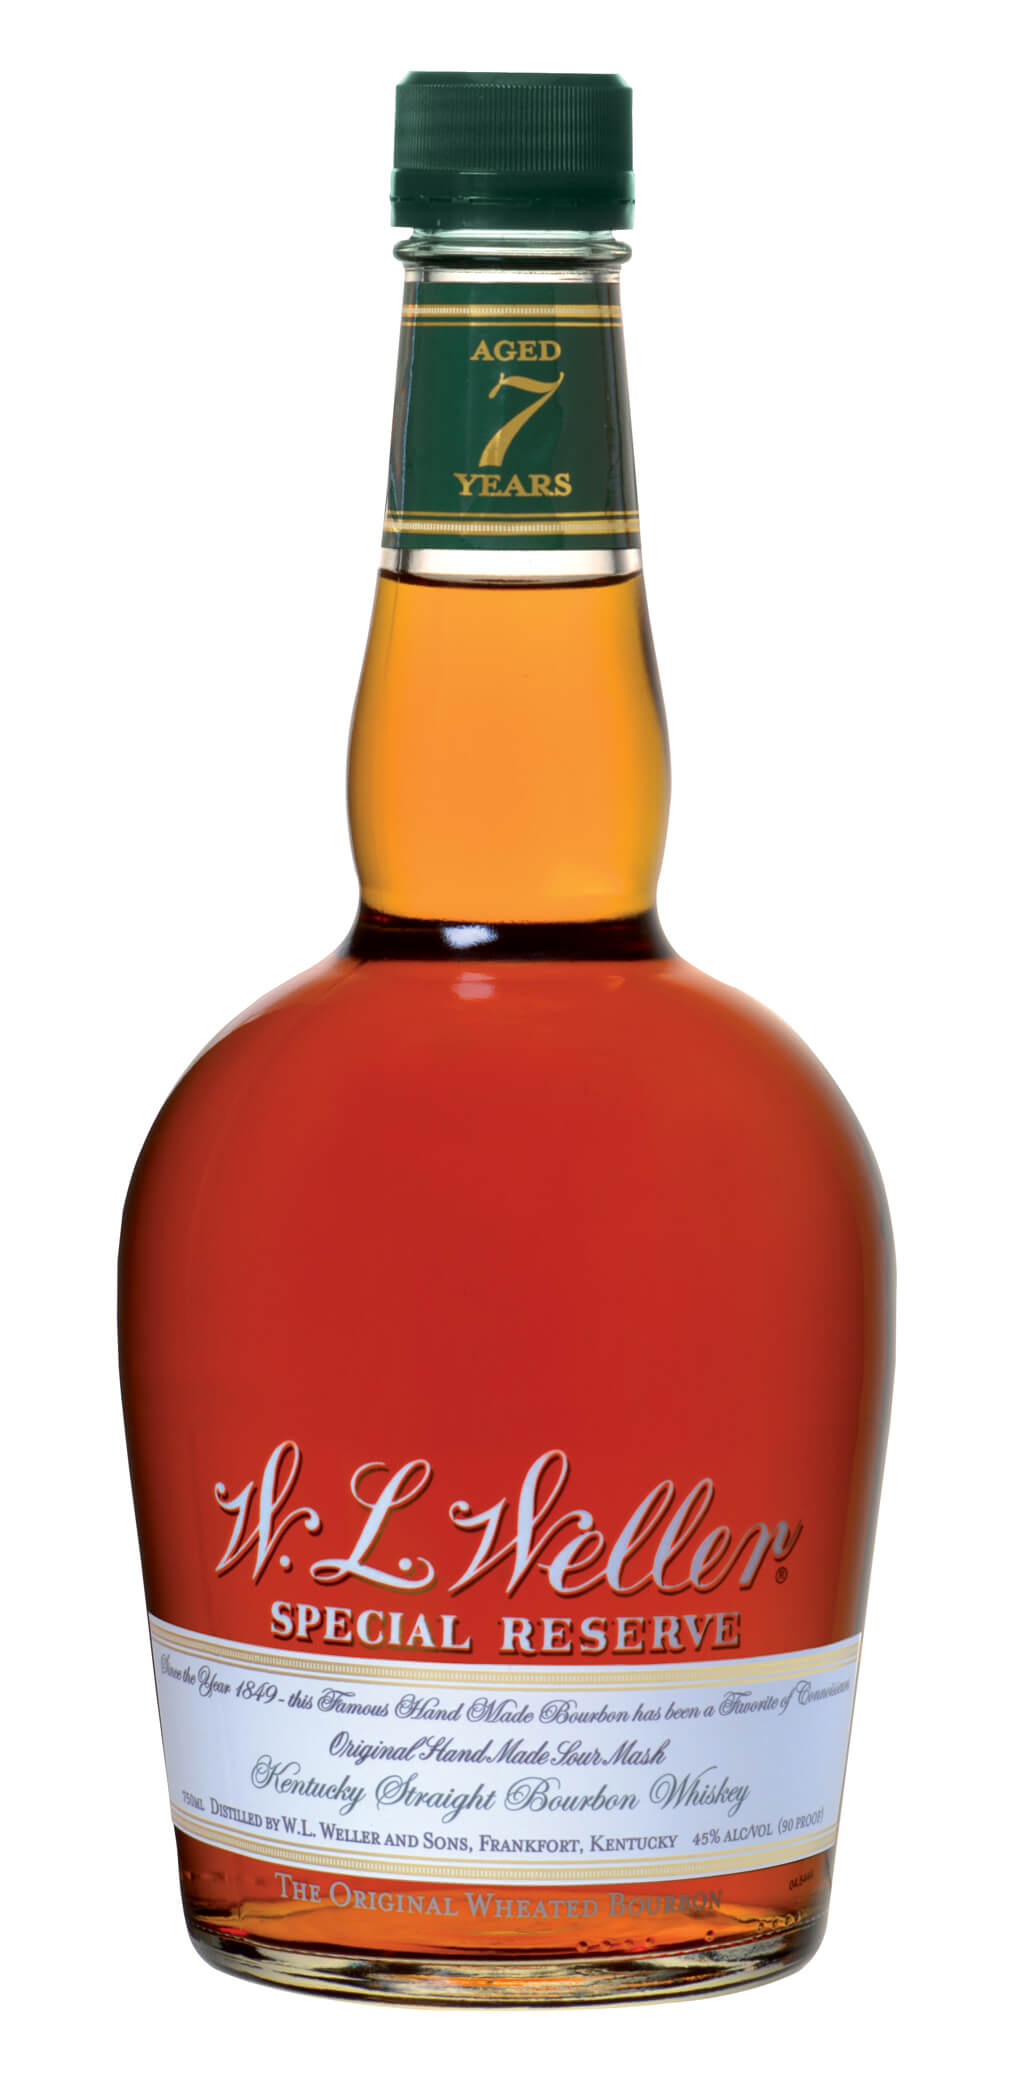 Older W.L. Weller Special Reserve bottling with a 7 year age statement on the neck